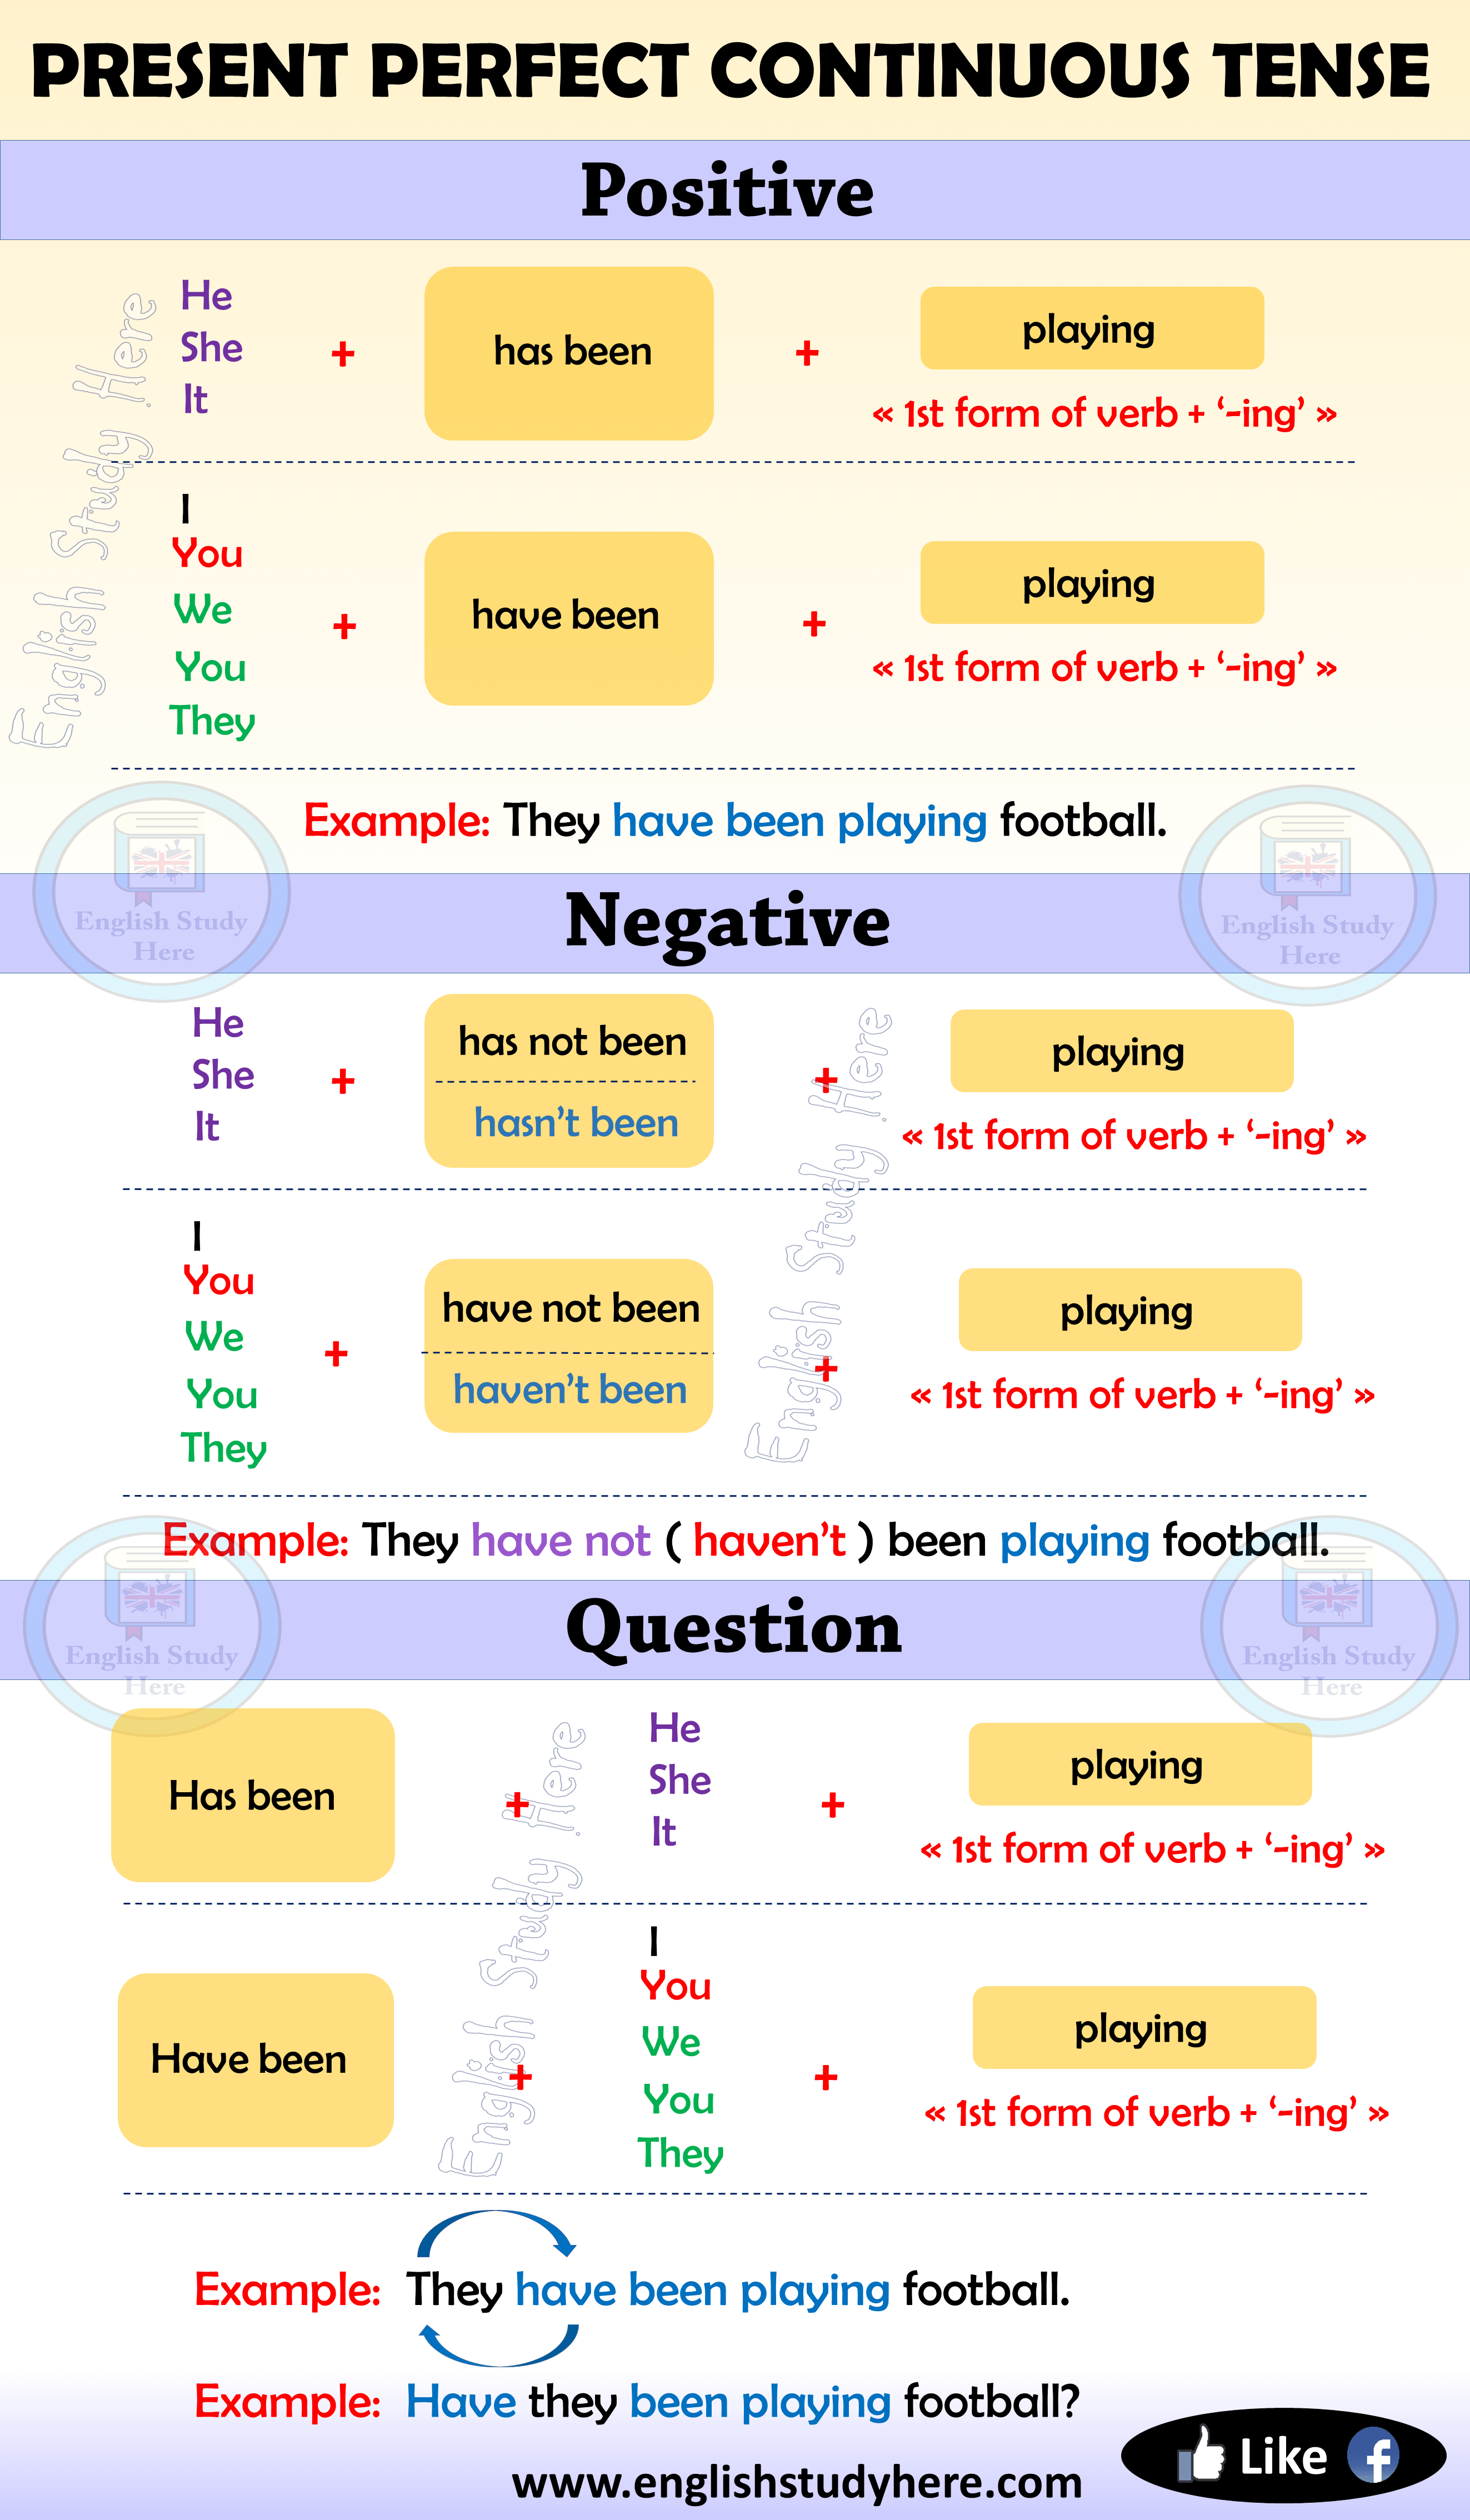 present-perfect-continuous-tense-in-english-english-study-here